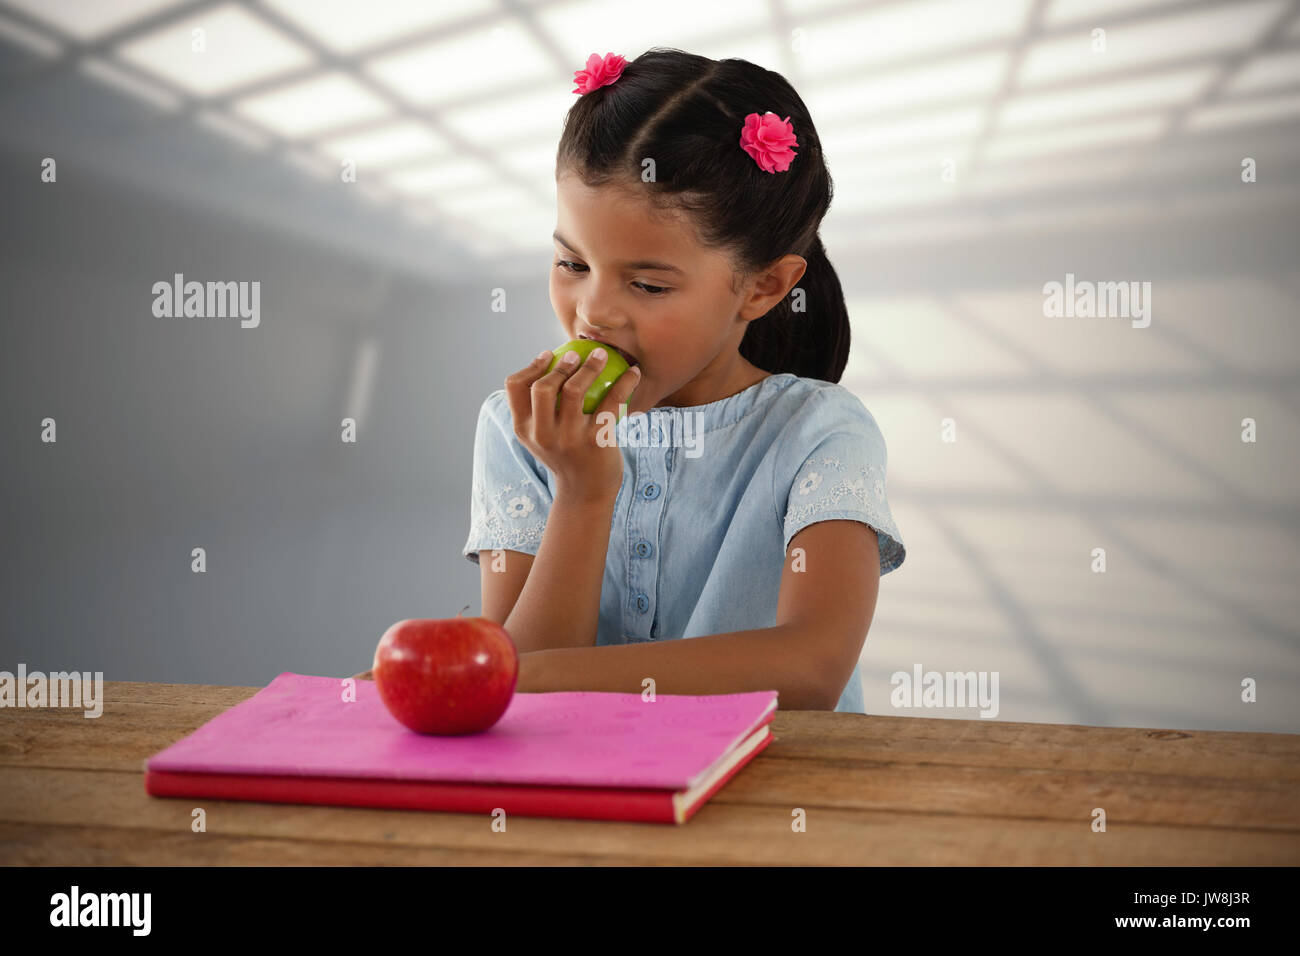 Girl eating Granny Smith apple at table against white room with windows at ceiling Stock Photo